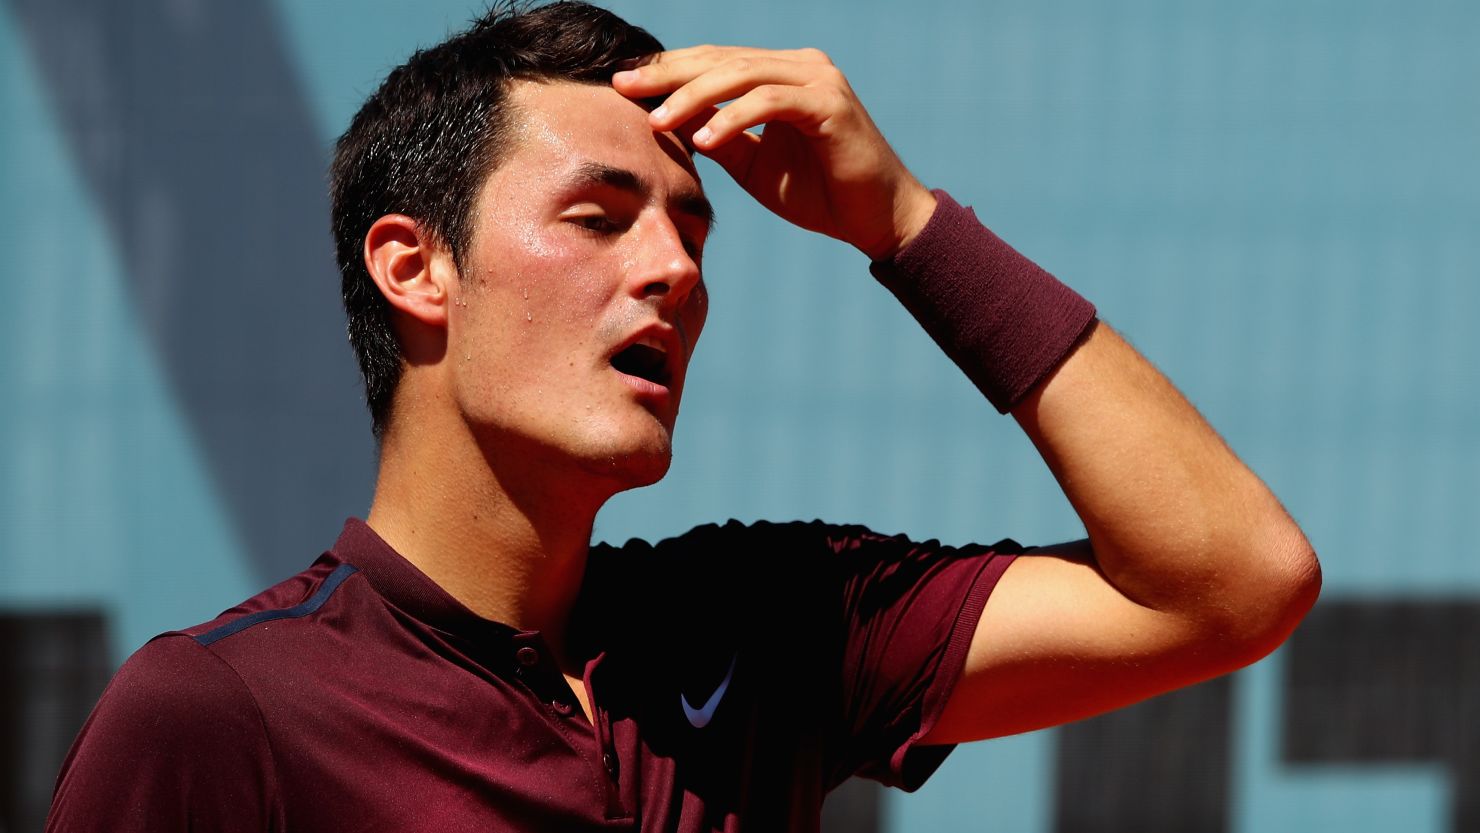 Bernard Tomic lost in straight sets to Fabio Fognini at the Madrid Open.